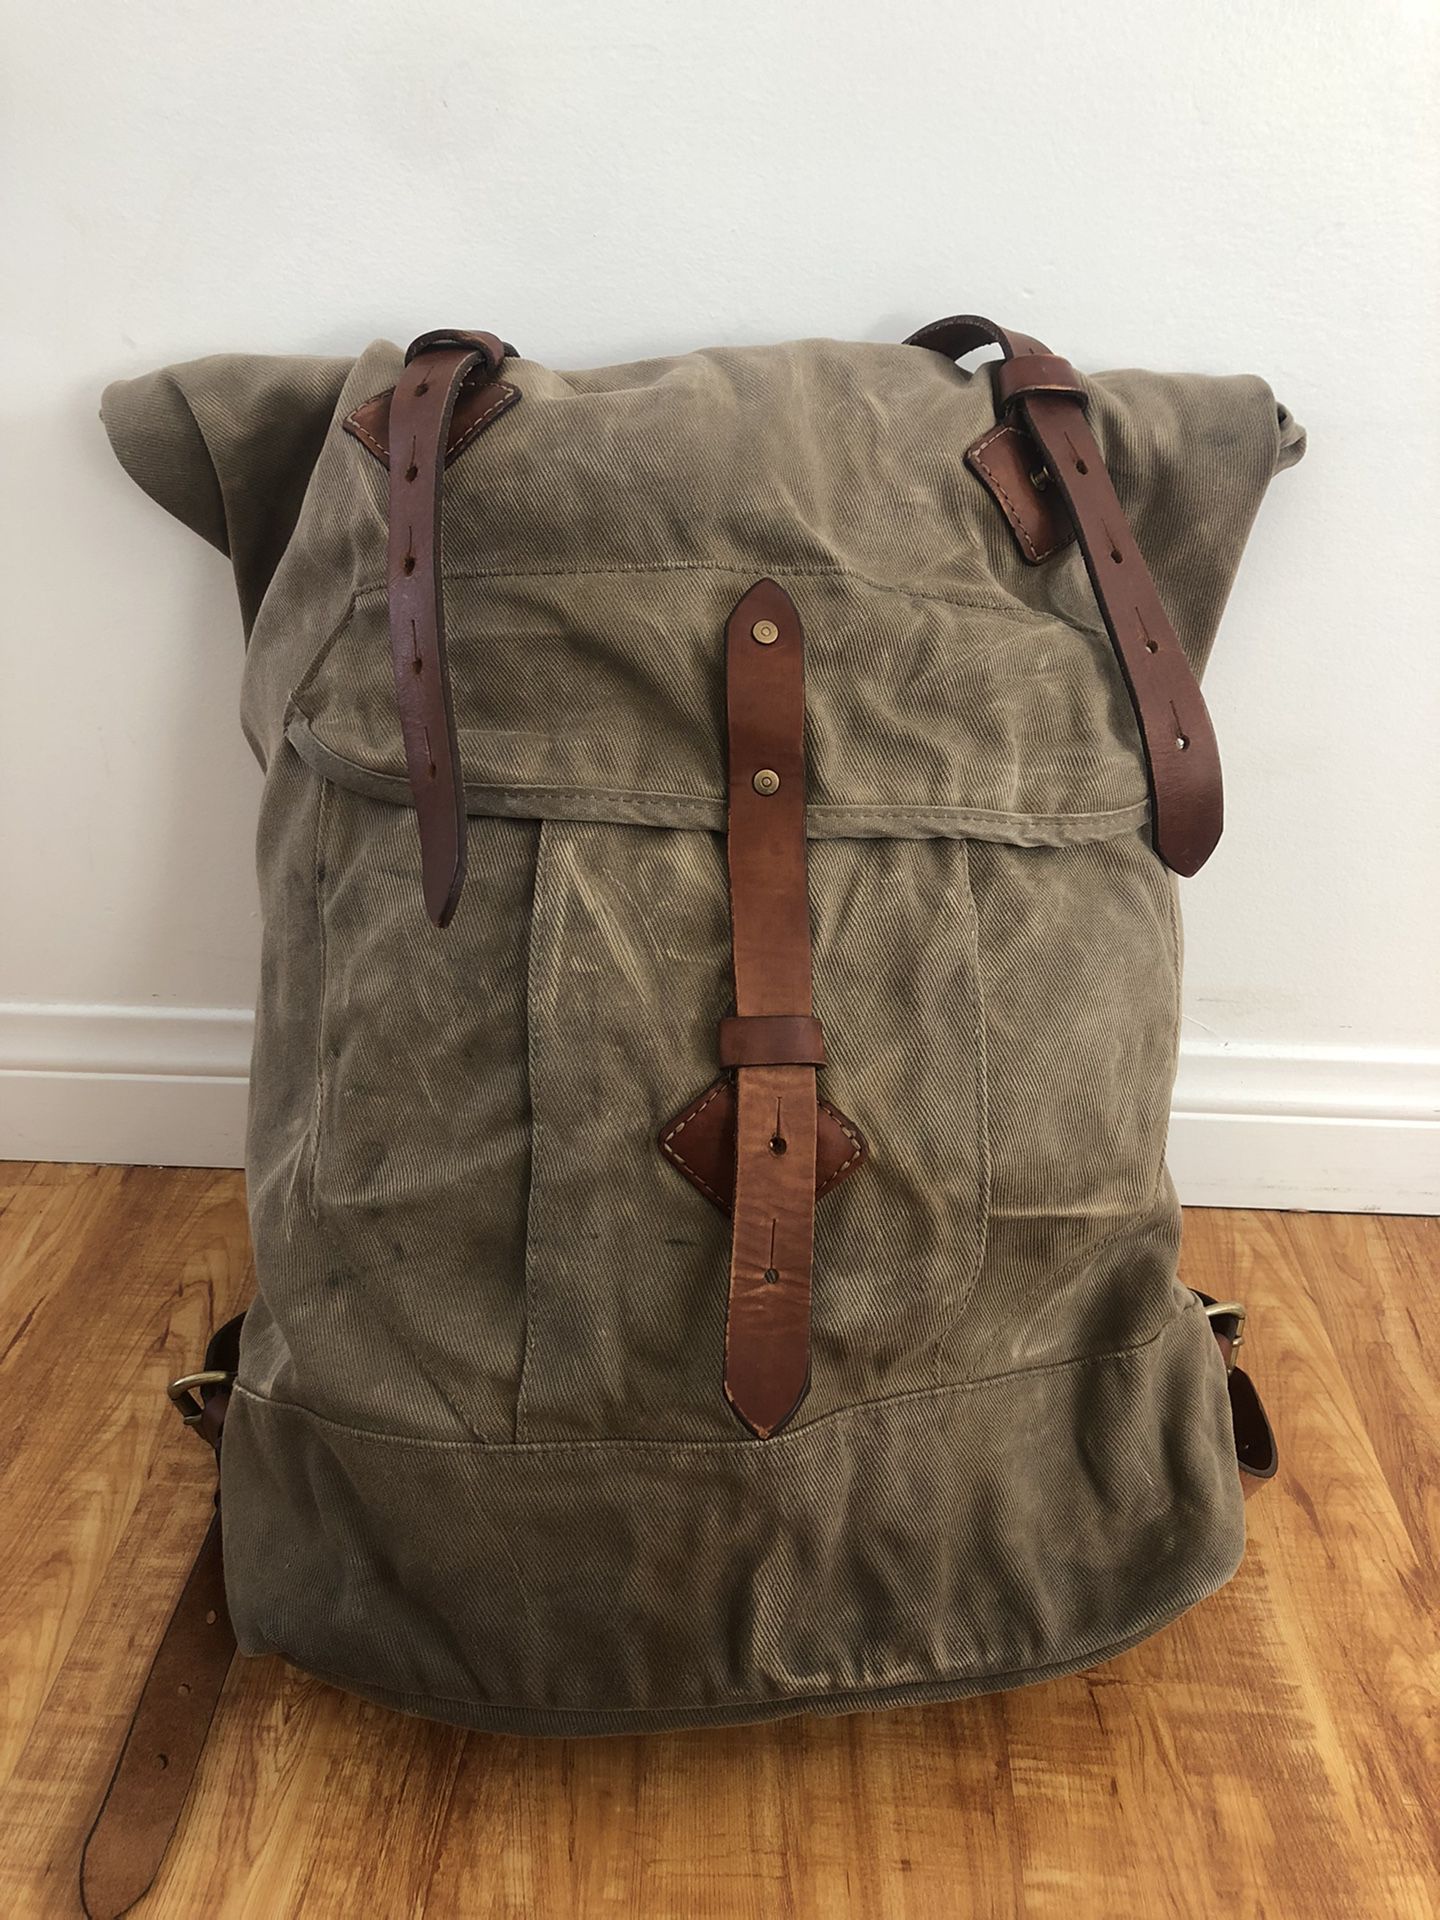 Tanner Goods Wilderness Backpack - Roll top Wax Canvas Backpack